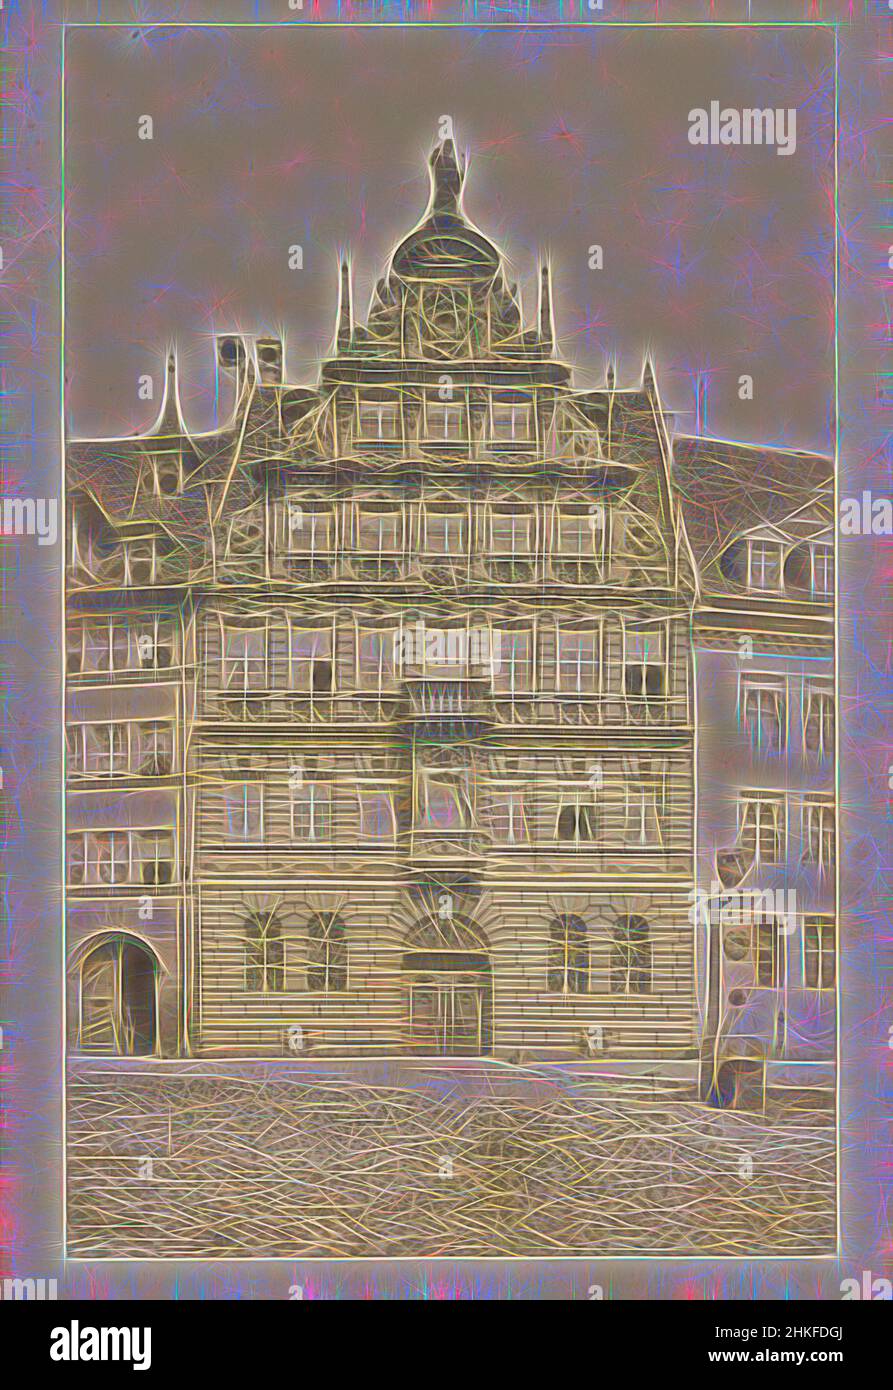 Inspired by The Pellerhaus in Nuremberg, Pellerhaus, Nuremberg, publisher: Friedrich Bruckmann, Neurenberg, publisher: München, 1863 - 1898, albumen print, height 171 mm × width 113 mm, Reimagined by Artotop. Classic art reinvented with a modern twist. Design of warm cheerful glowing of brightness and light ray radiance. Photography inspired by surrealism and futurism, embracing dynamic energy of modern technology, movement, speed and revolutionize culture Stock Photo